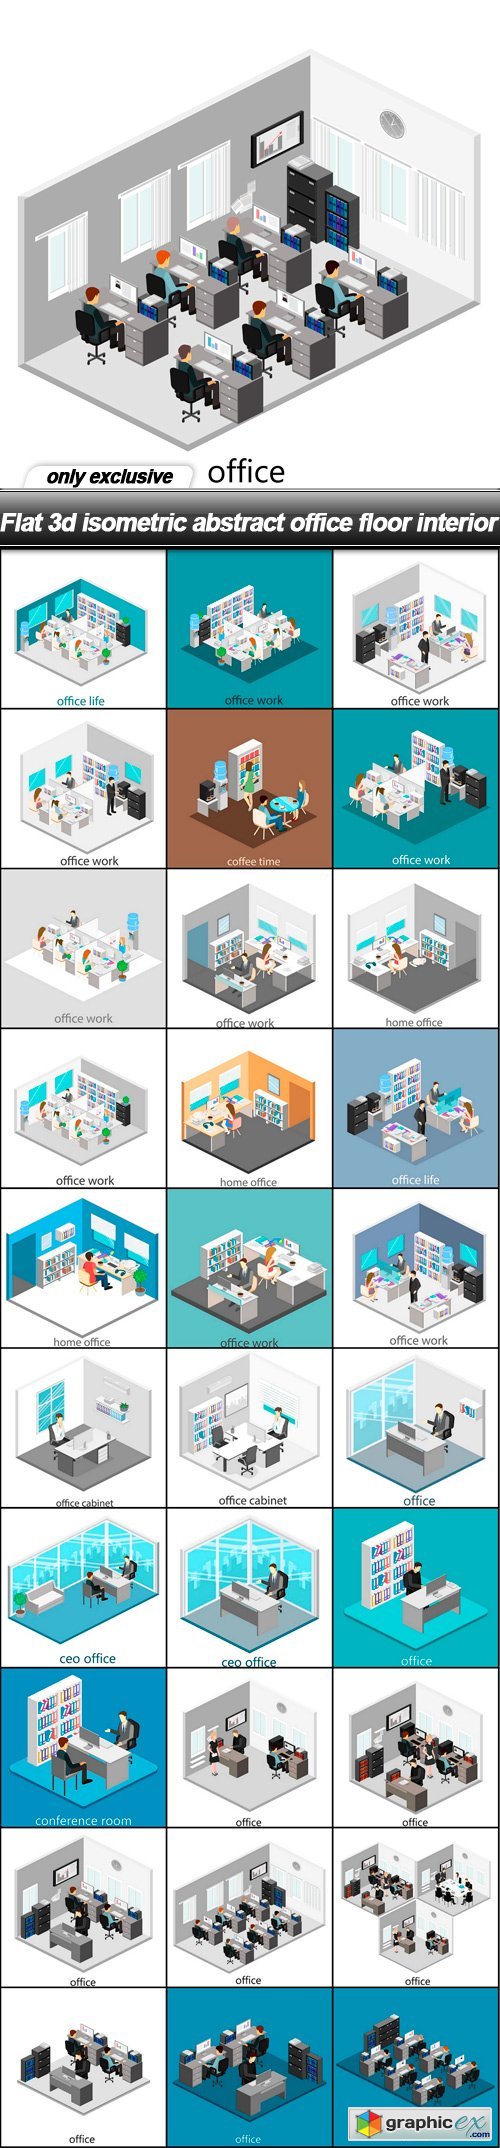 Flat 3d isometric abstract office floor interior - 30 EPS